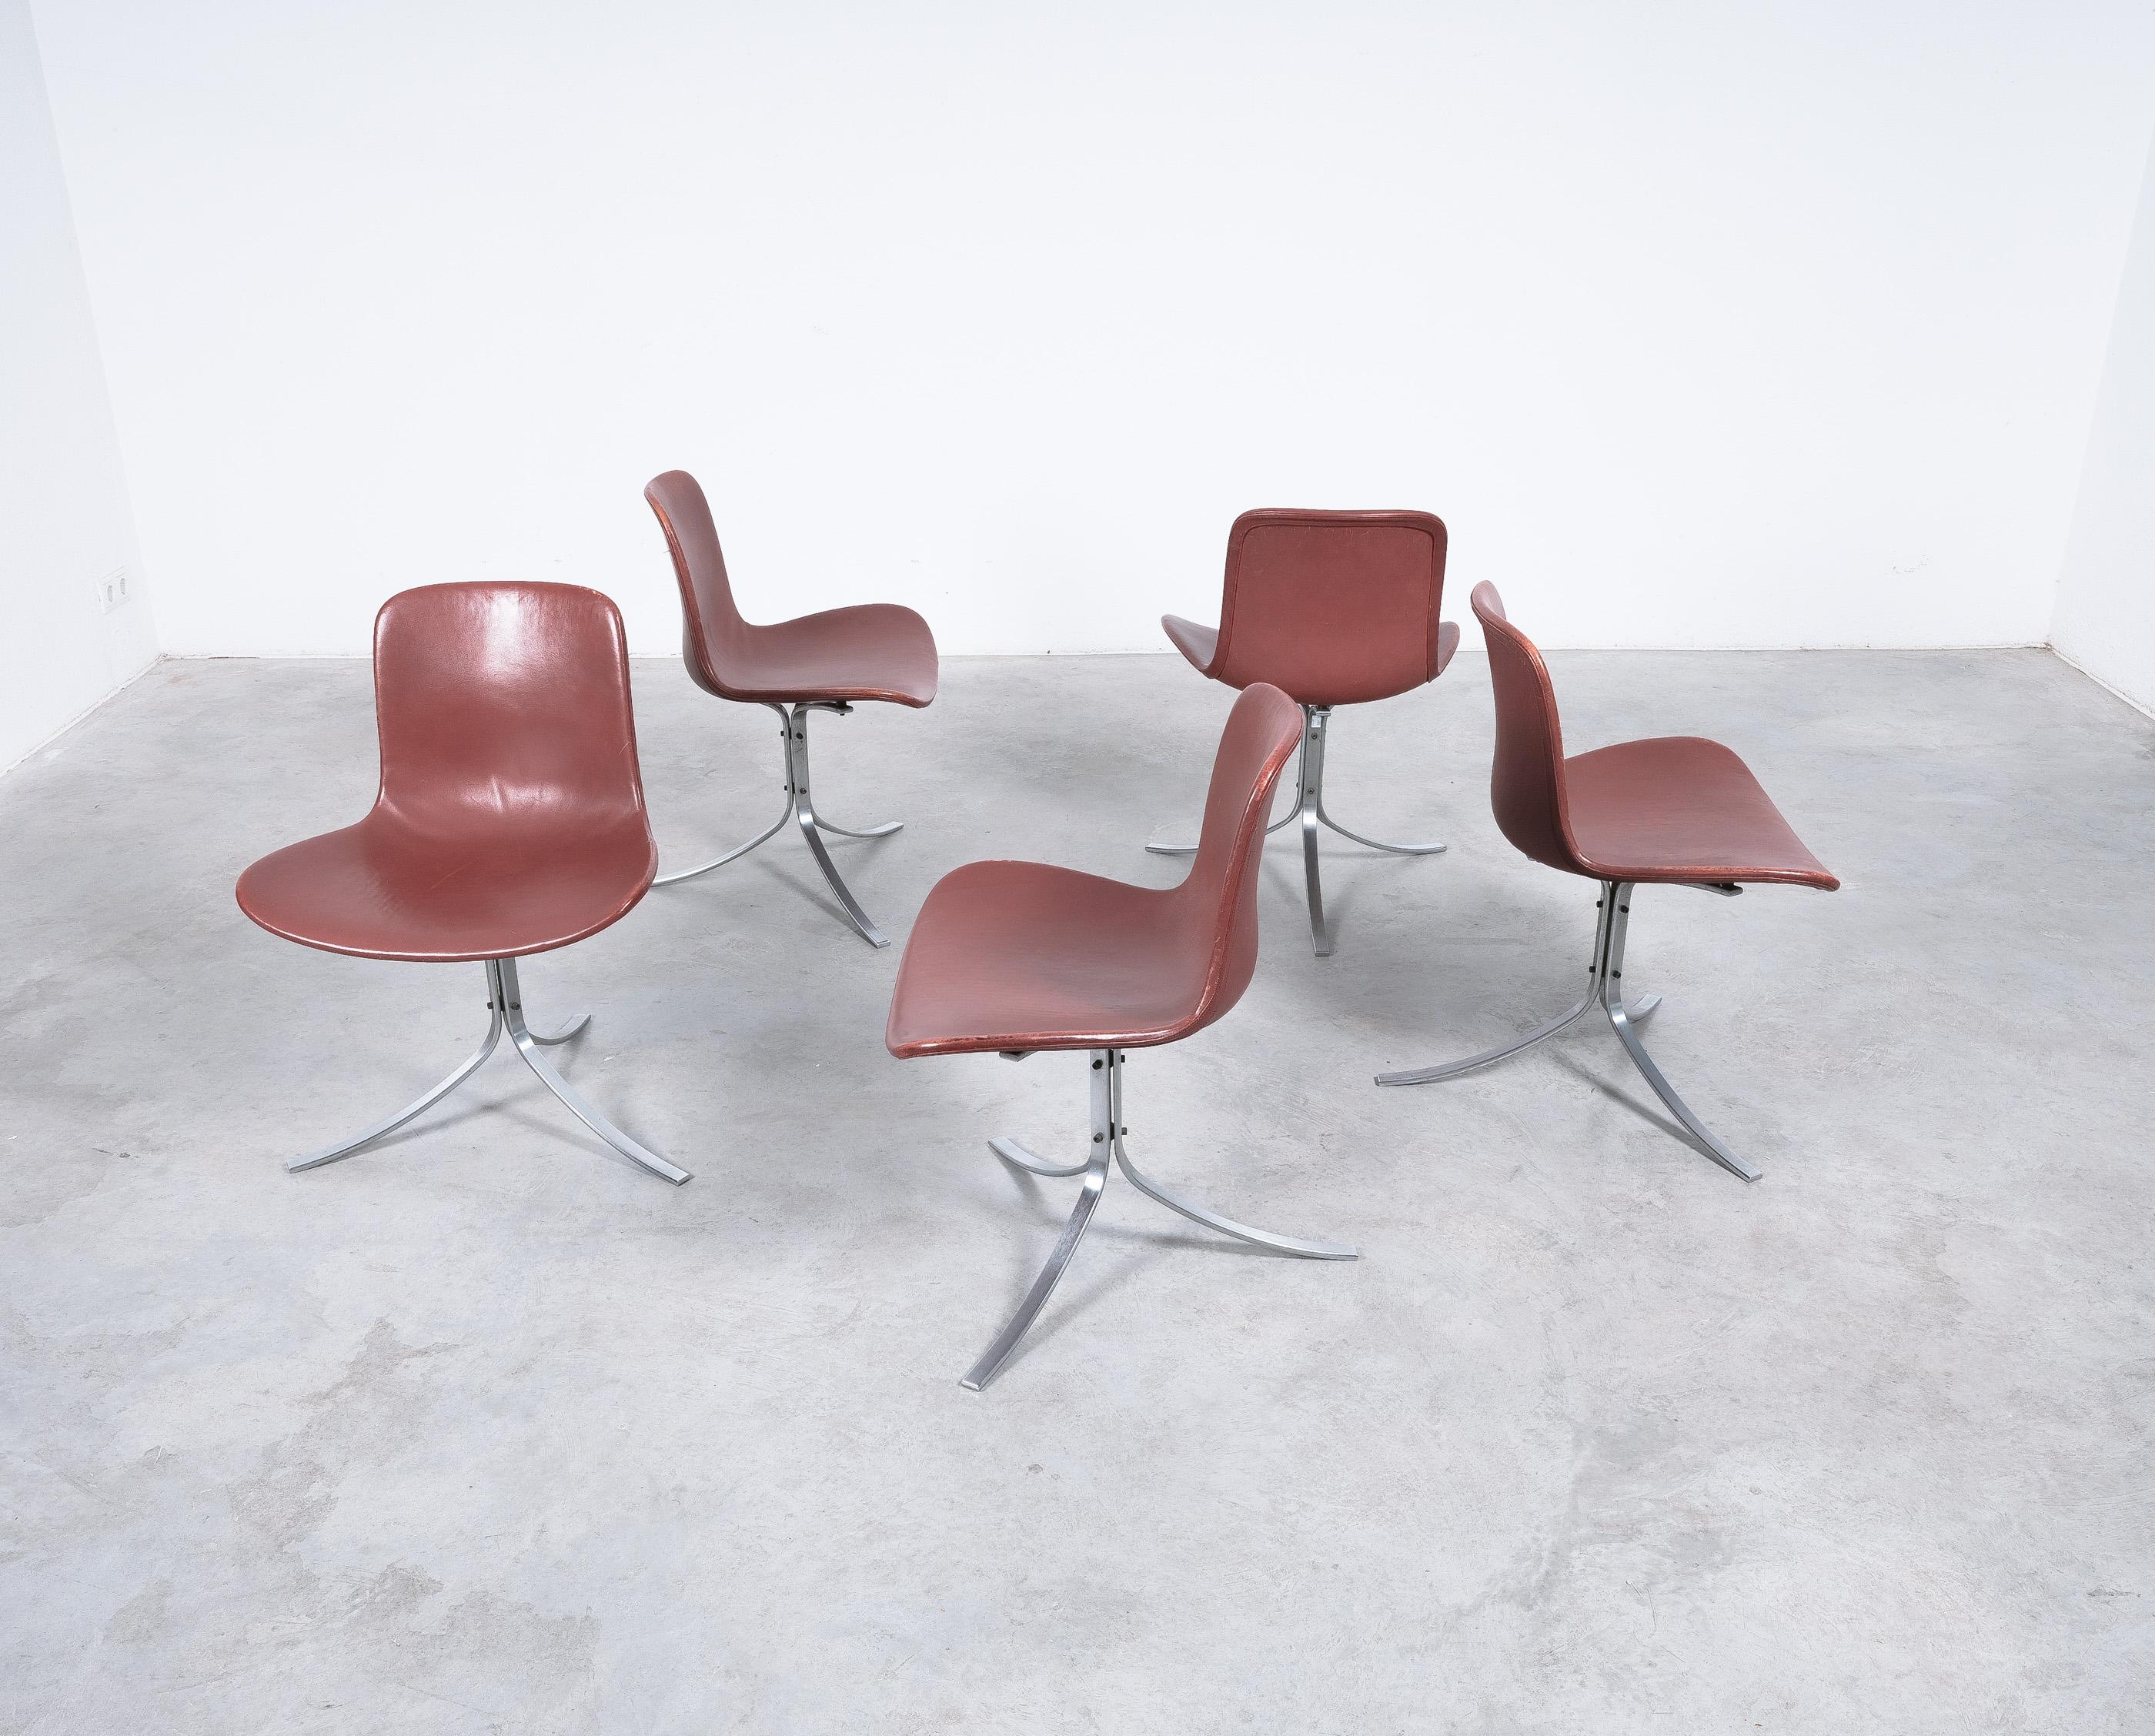 Mid-20th Century Poul Kjærholm PK-9 Dining Chairs by E. Kold Christensen Brown Leather, Denmark For Sale